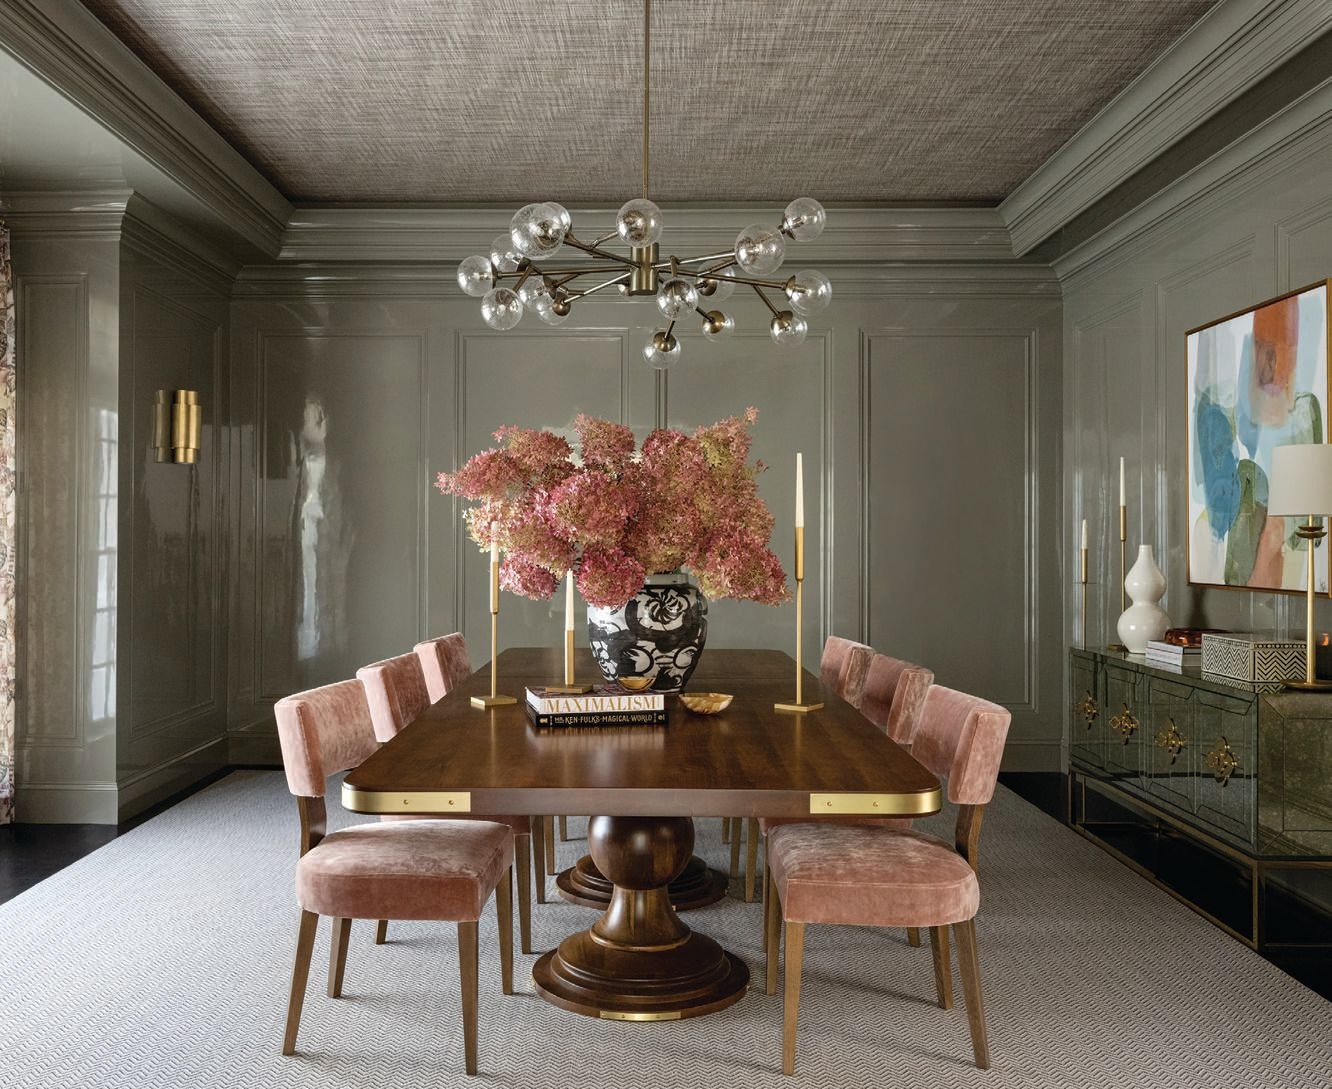 A dining room by Kathryn Hufton Design, styling by Sean William MARGUERITE INTERIORS PHOTO BY NATALIA CELESTIN.